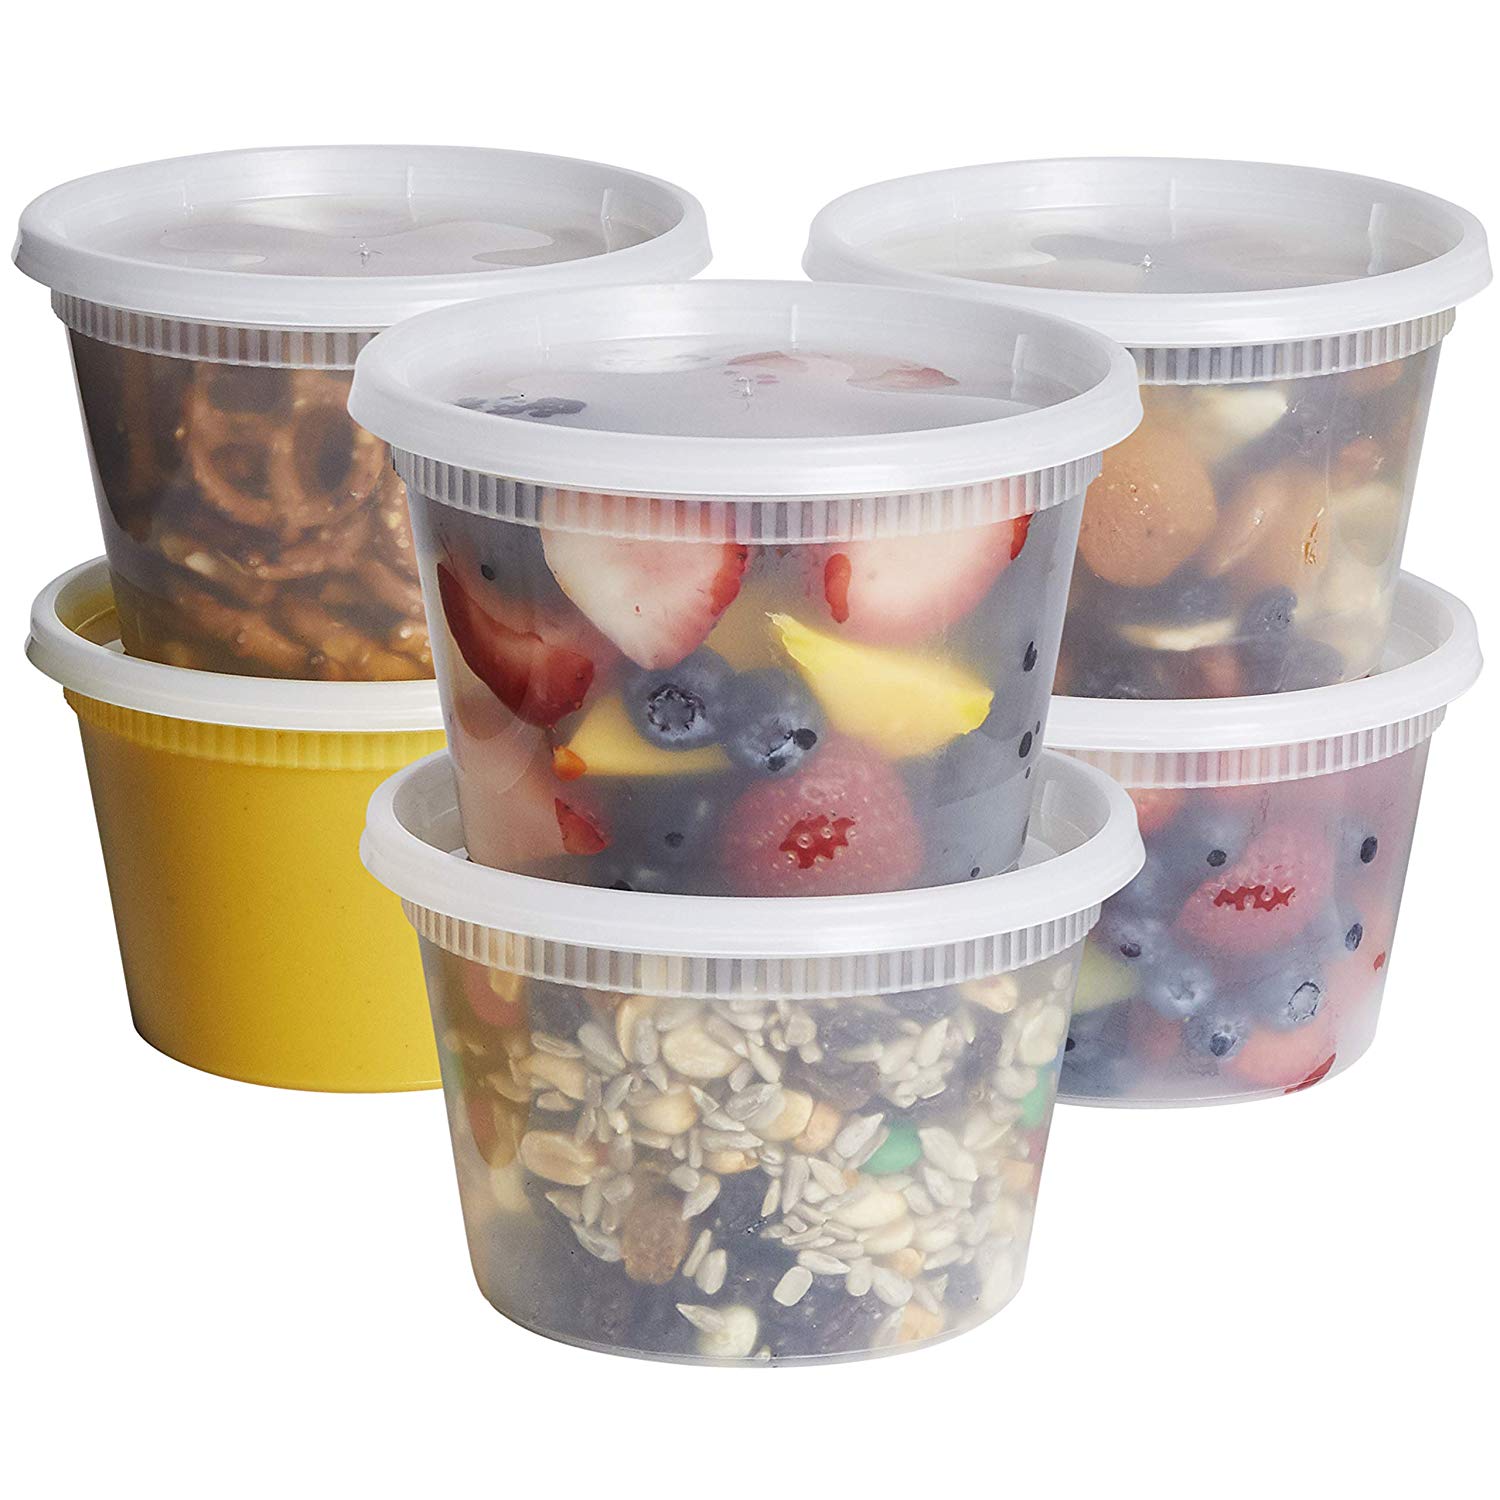 NEEBAKE 16 Oz Deli-Containers-with-Lids: [60 Set] Plastic  Food-Storage-Containers-with-Lids, Microwaveable & Freezer Safe  To-Go-Containers, Leak-proof